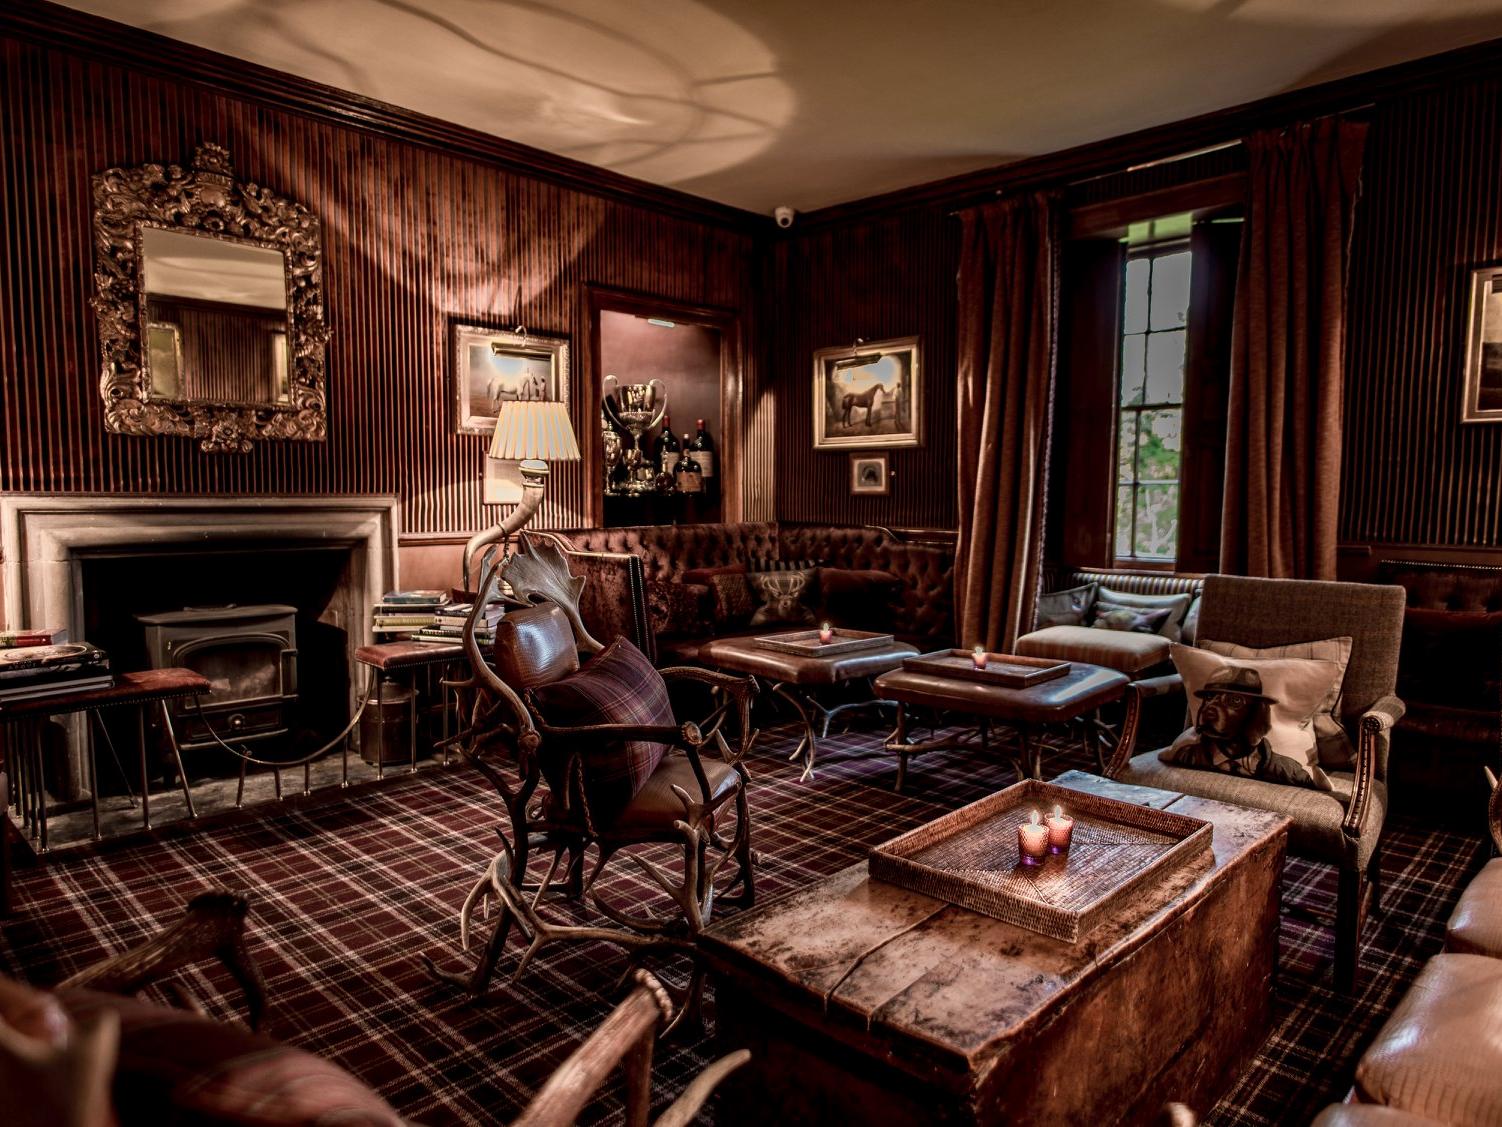 Situated within 20 acres of gardens and found next to the iconic Arthur's Seat, Prestonfield House holds unique rooms and a five star atmosphere. No two rooms are alike. Priestfield Road, EH16 5UT